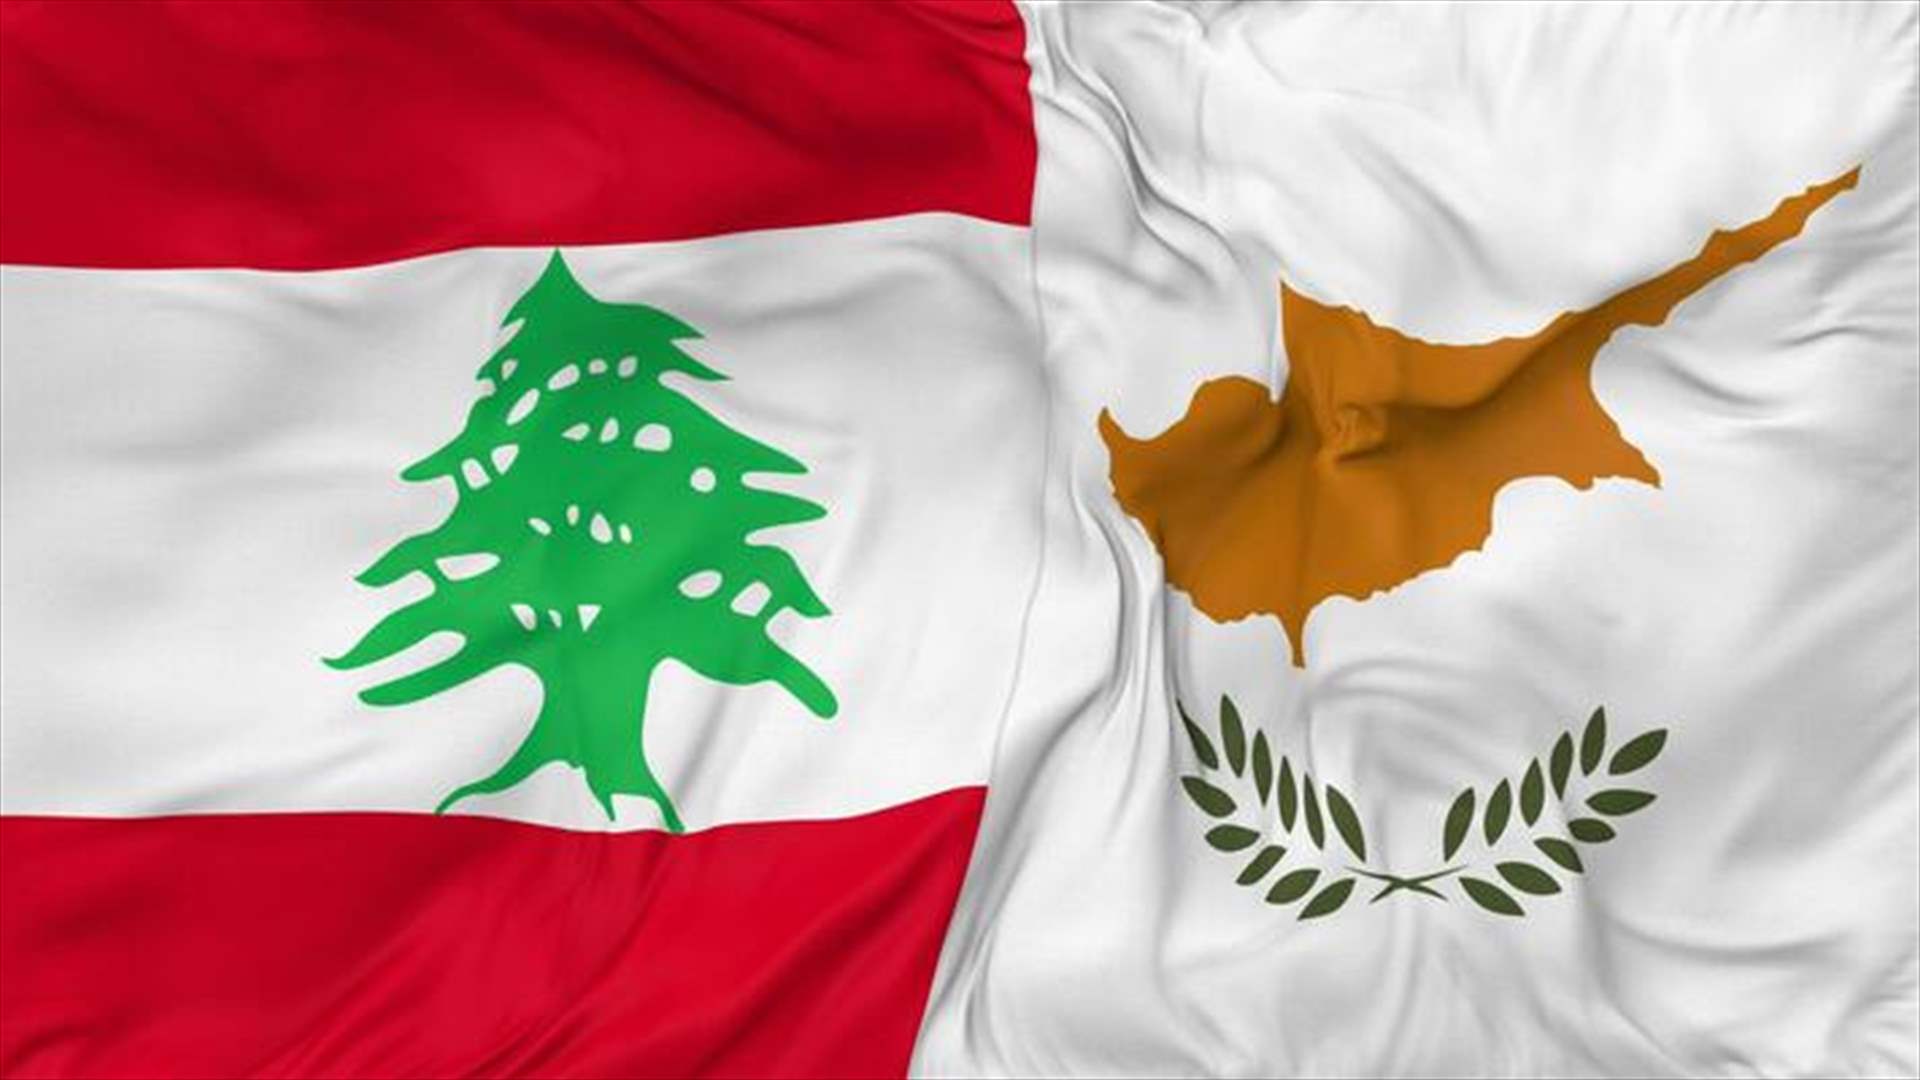 Cyprus stresses commitment to stability amid Lebanon conflict allegations